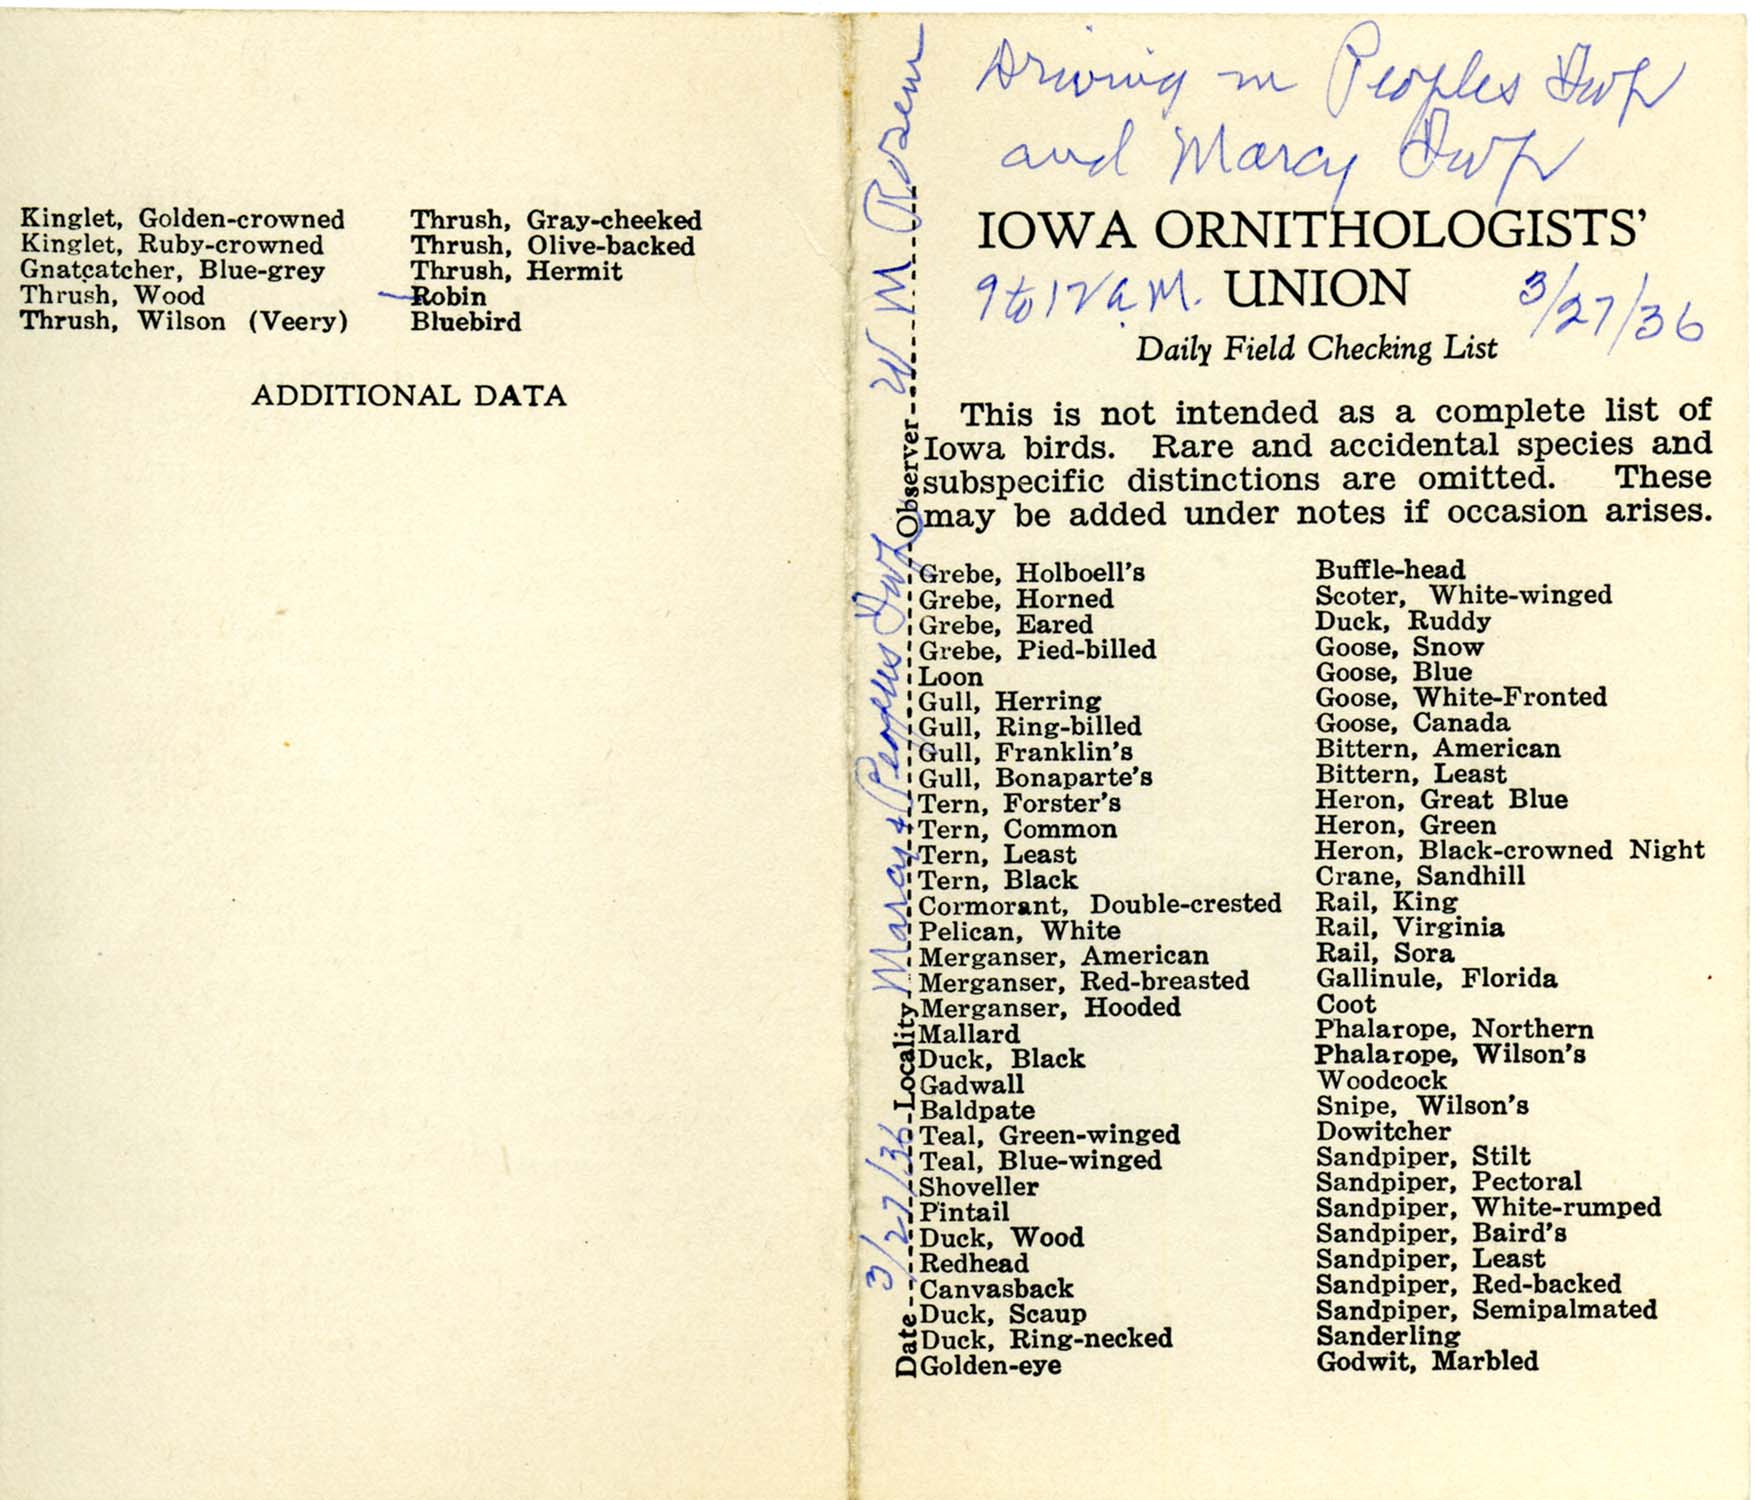 Daily field checking list by Walter Rosene, March 27, 1936